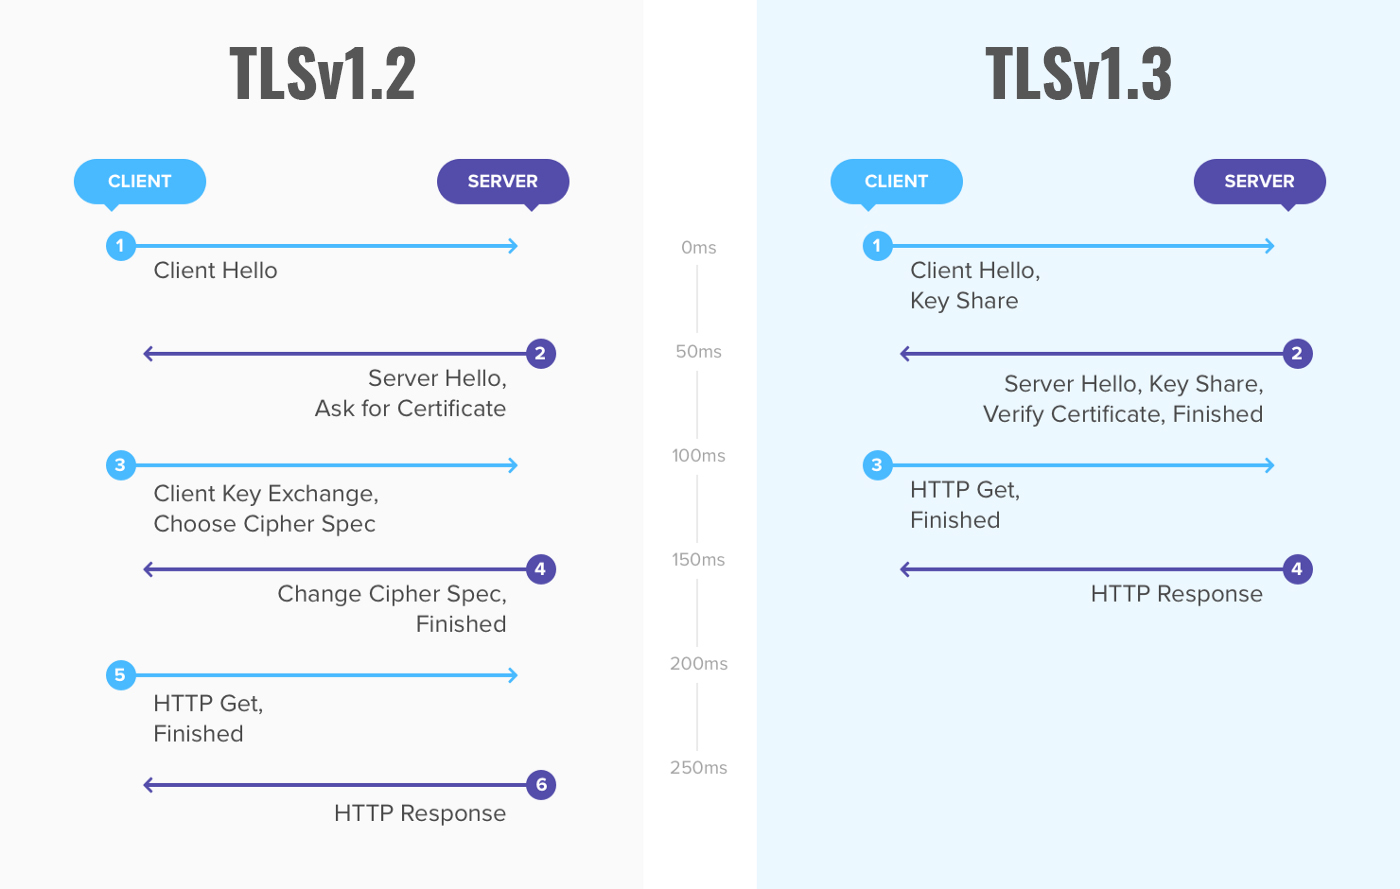 The differences between TLS 1.2 and TLS 1.3